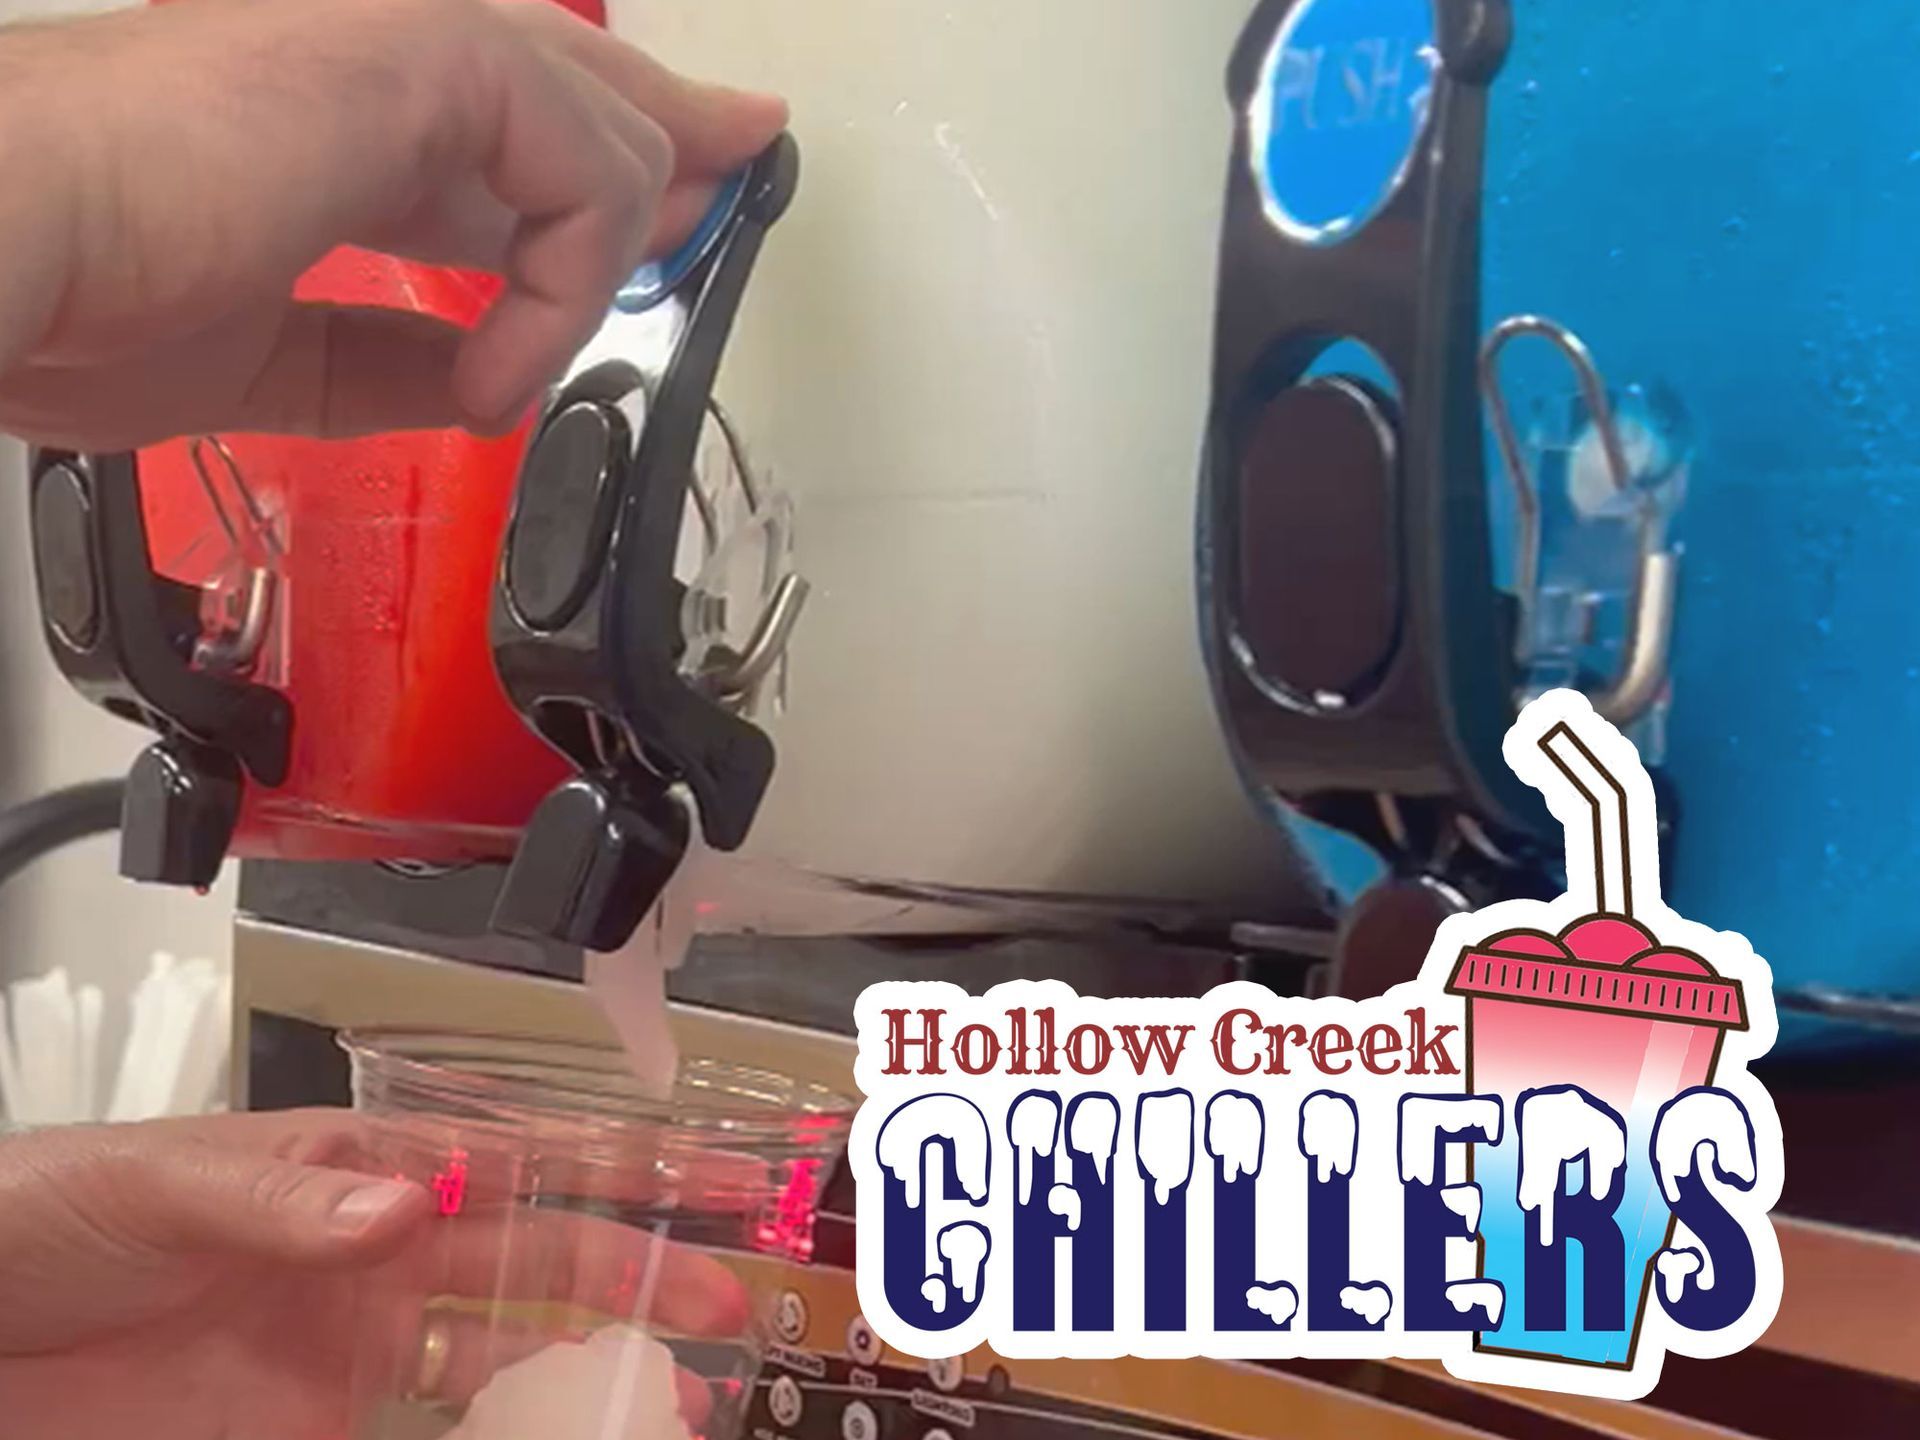 It's the return of warm weather and Chillers, Hollow Creek Distillery's spirited frozen cocktail!